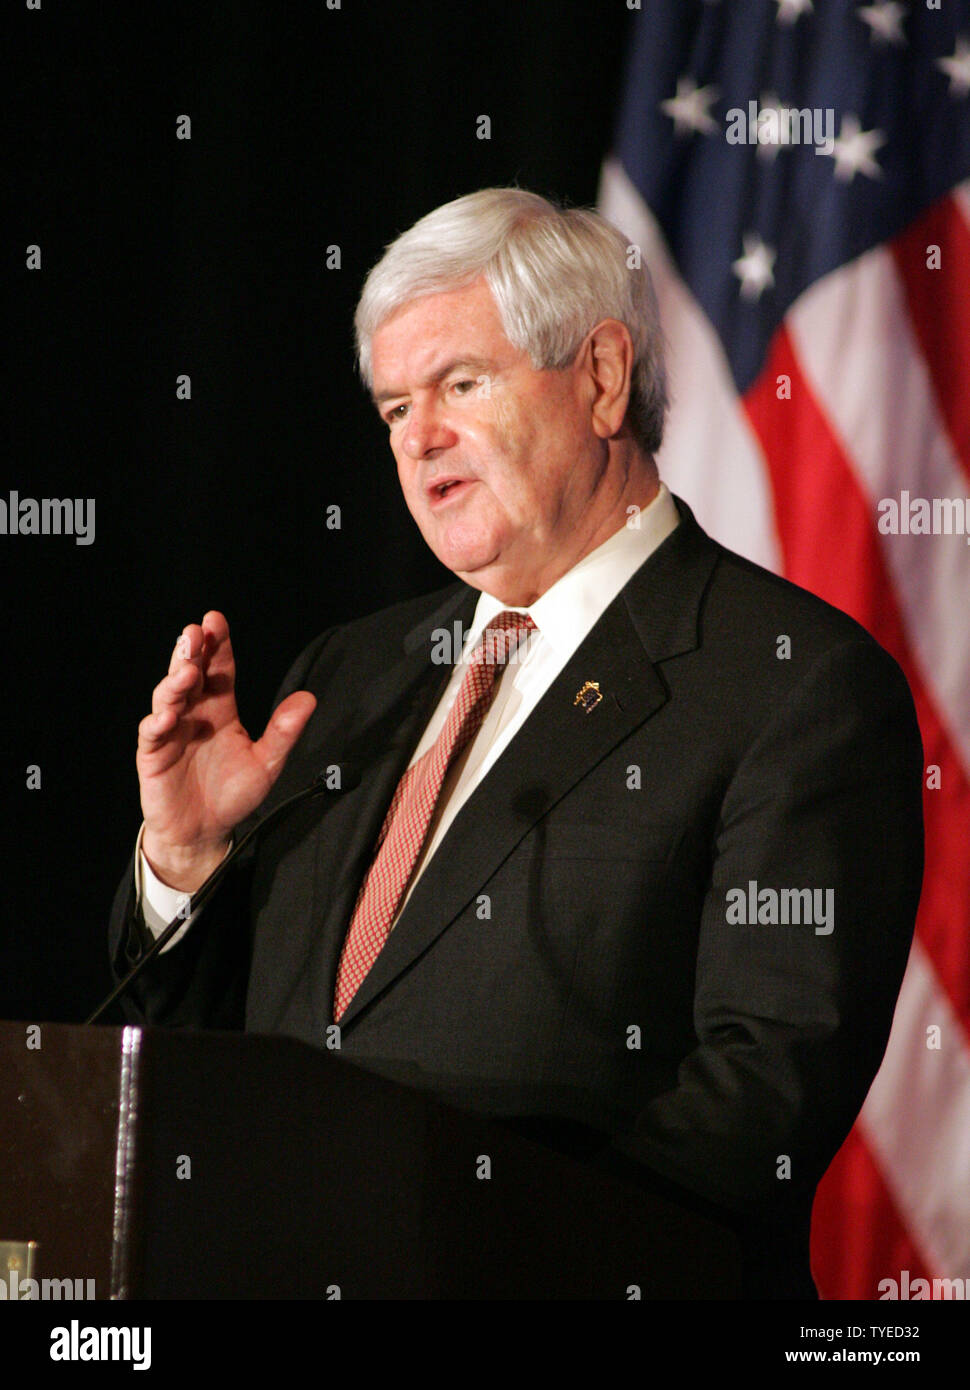 Republican Presidential hopeful Newt Gingrich speaks at the Hispanic Leadership Network conference at the Doral Golf Resort and Spa in Miami on January 27, 2012. UPI/Michael Bush Stock Photo